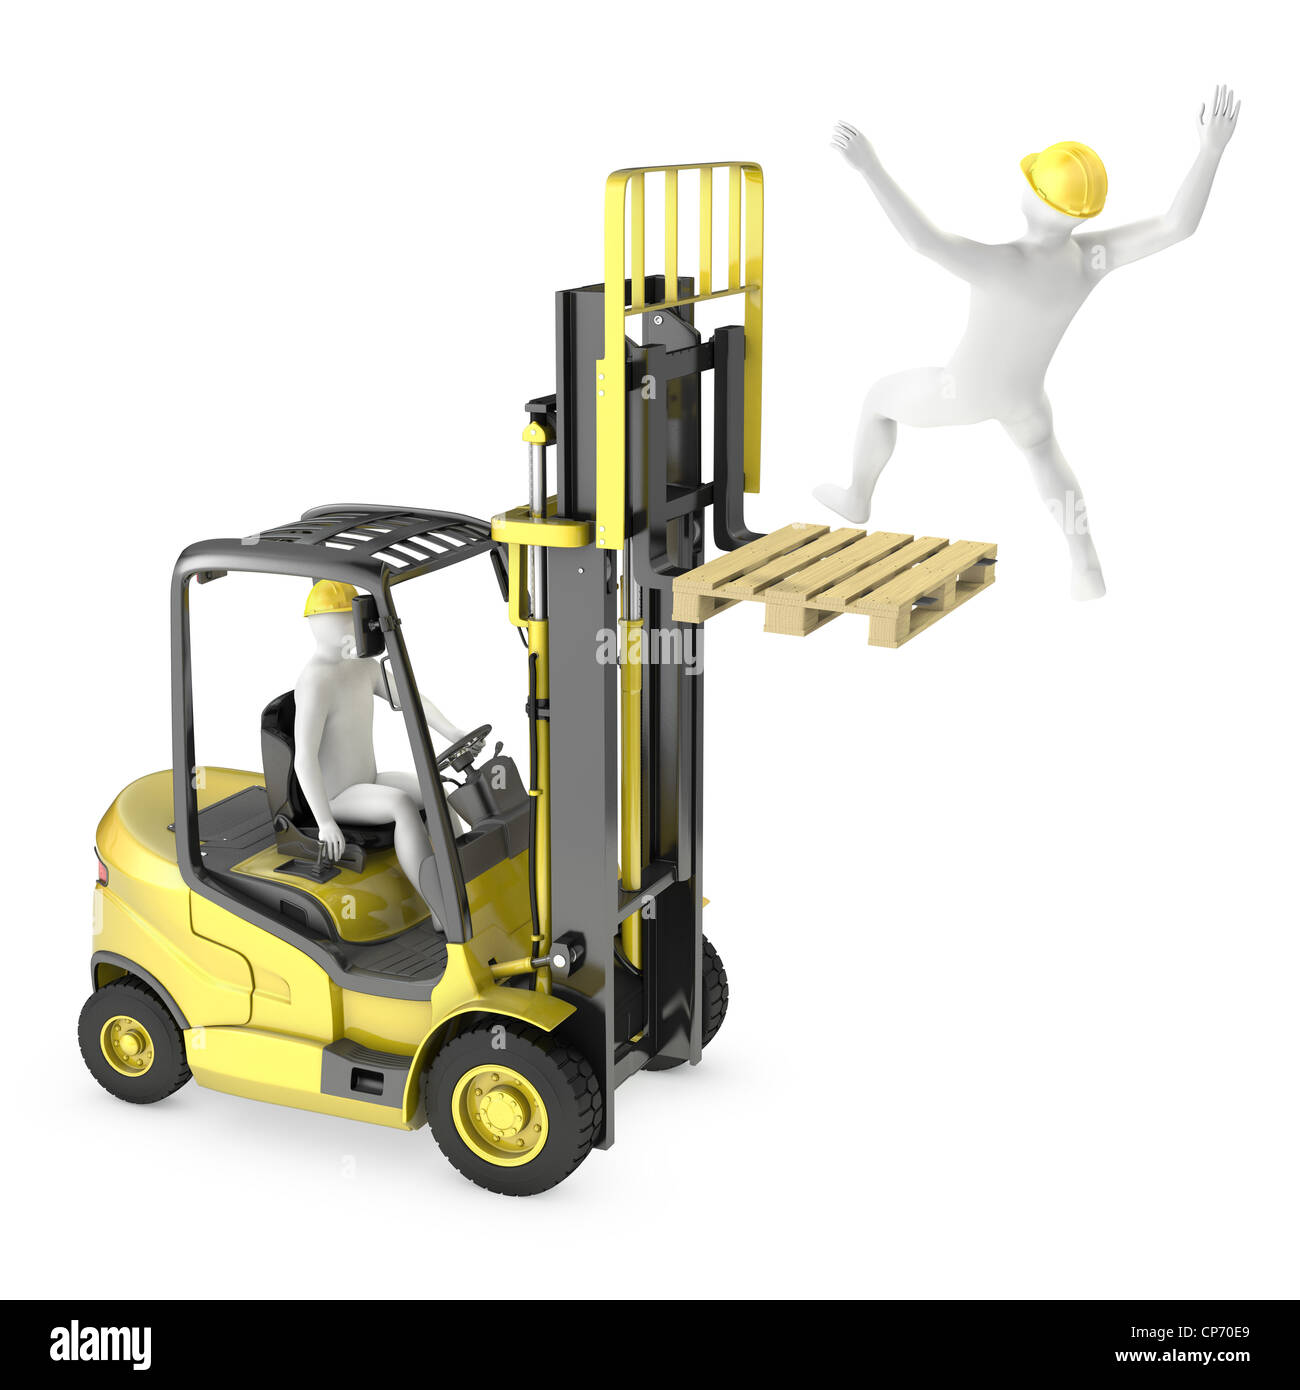 Abstract white man falling from lift truck fork, due to safety violation, isolated on white background Stock Photo